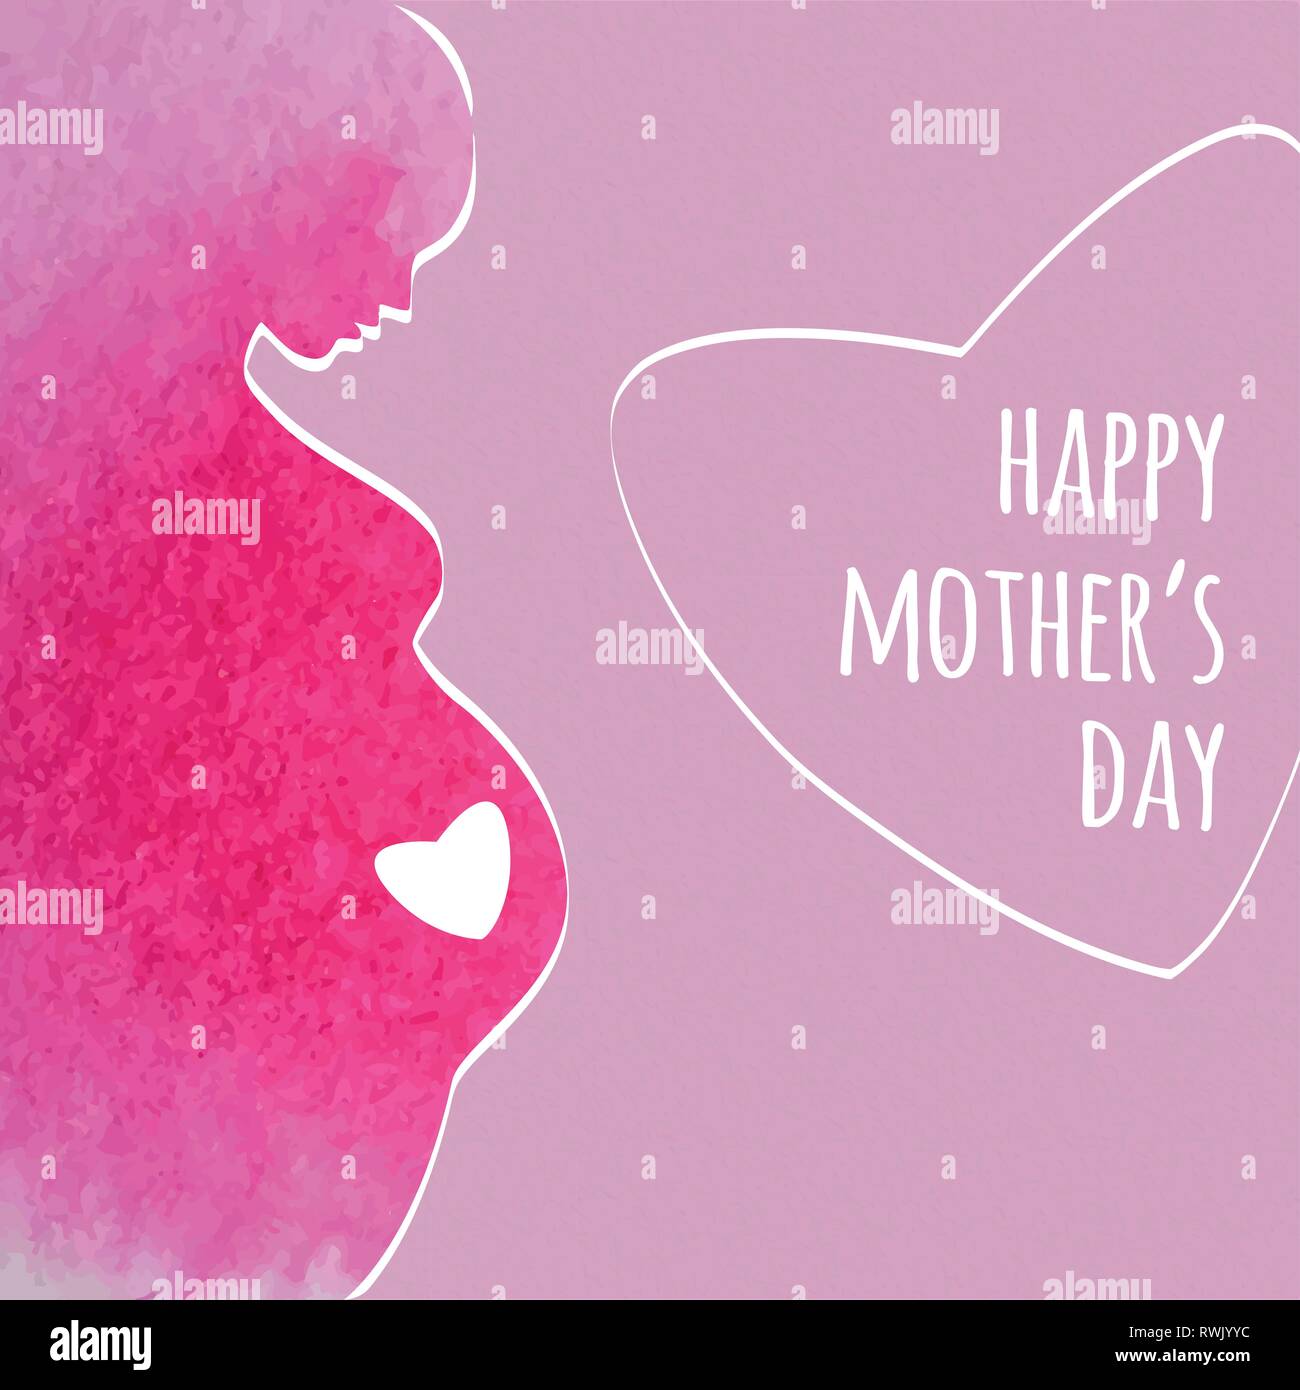 Pregnant woman cutout. Mothers day vectors. Happy mother's day greeting. Stock Vector